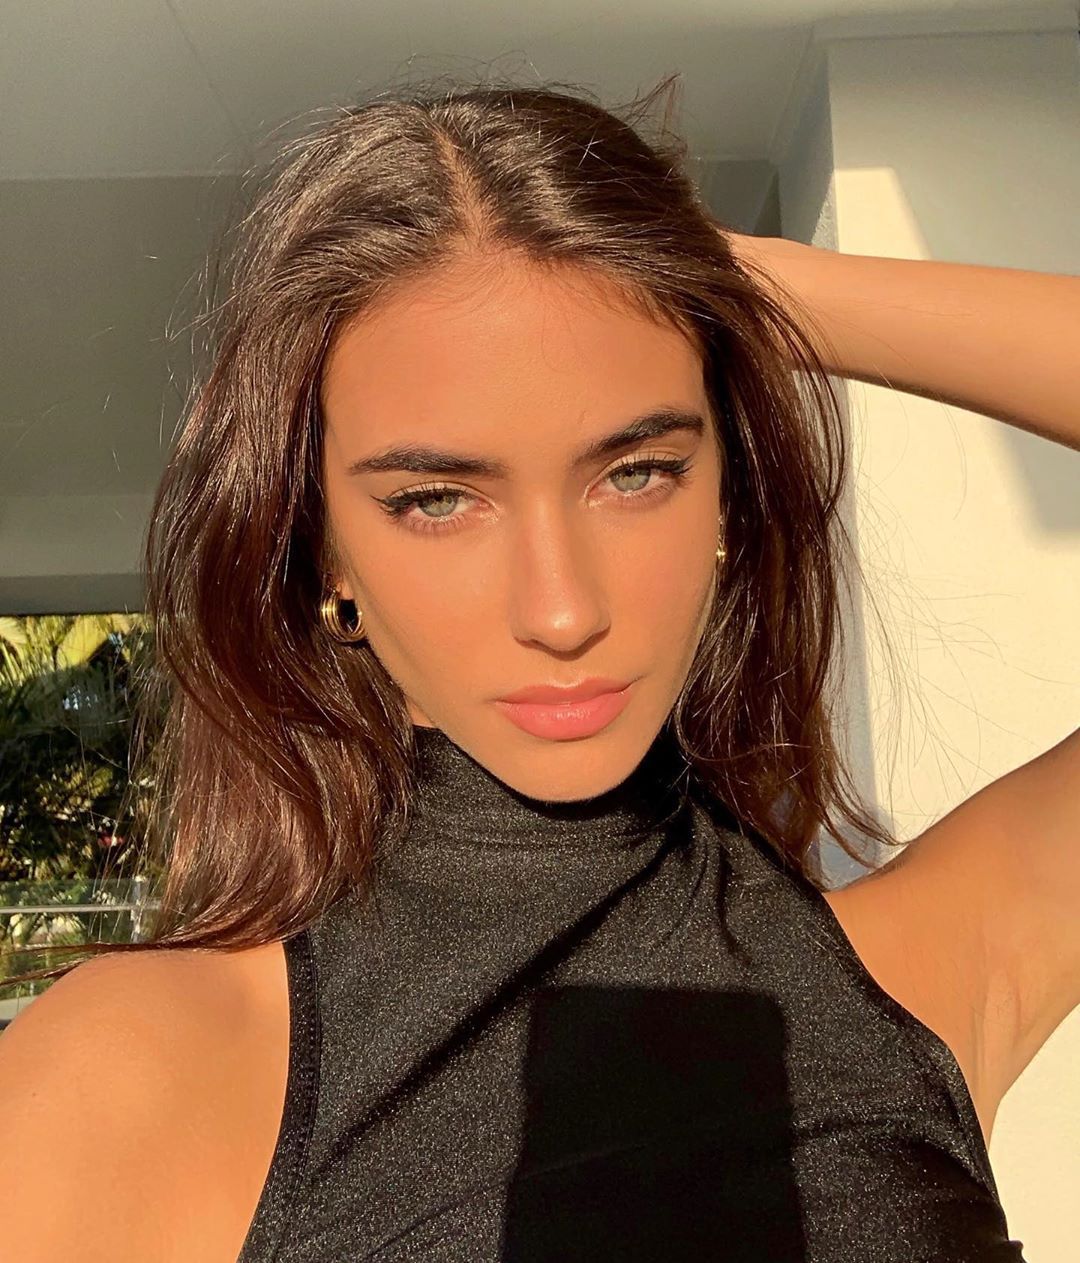 Renee?? on Instagram: “What color is everyone's eyes? Mine change from blue to green :-)” - Renee?? on Instagram: “What color is everyone's eyes? Mine change from blue to green :-)” -   15 beauty Face selfie ideas